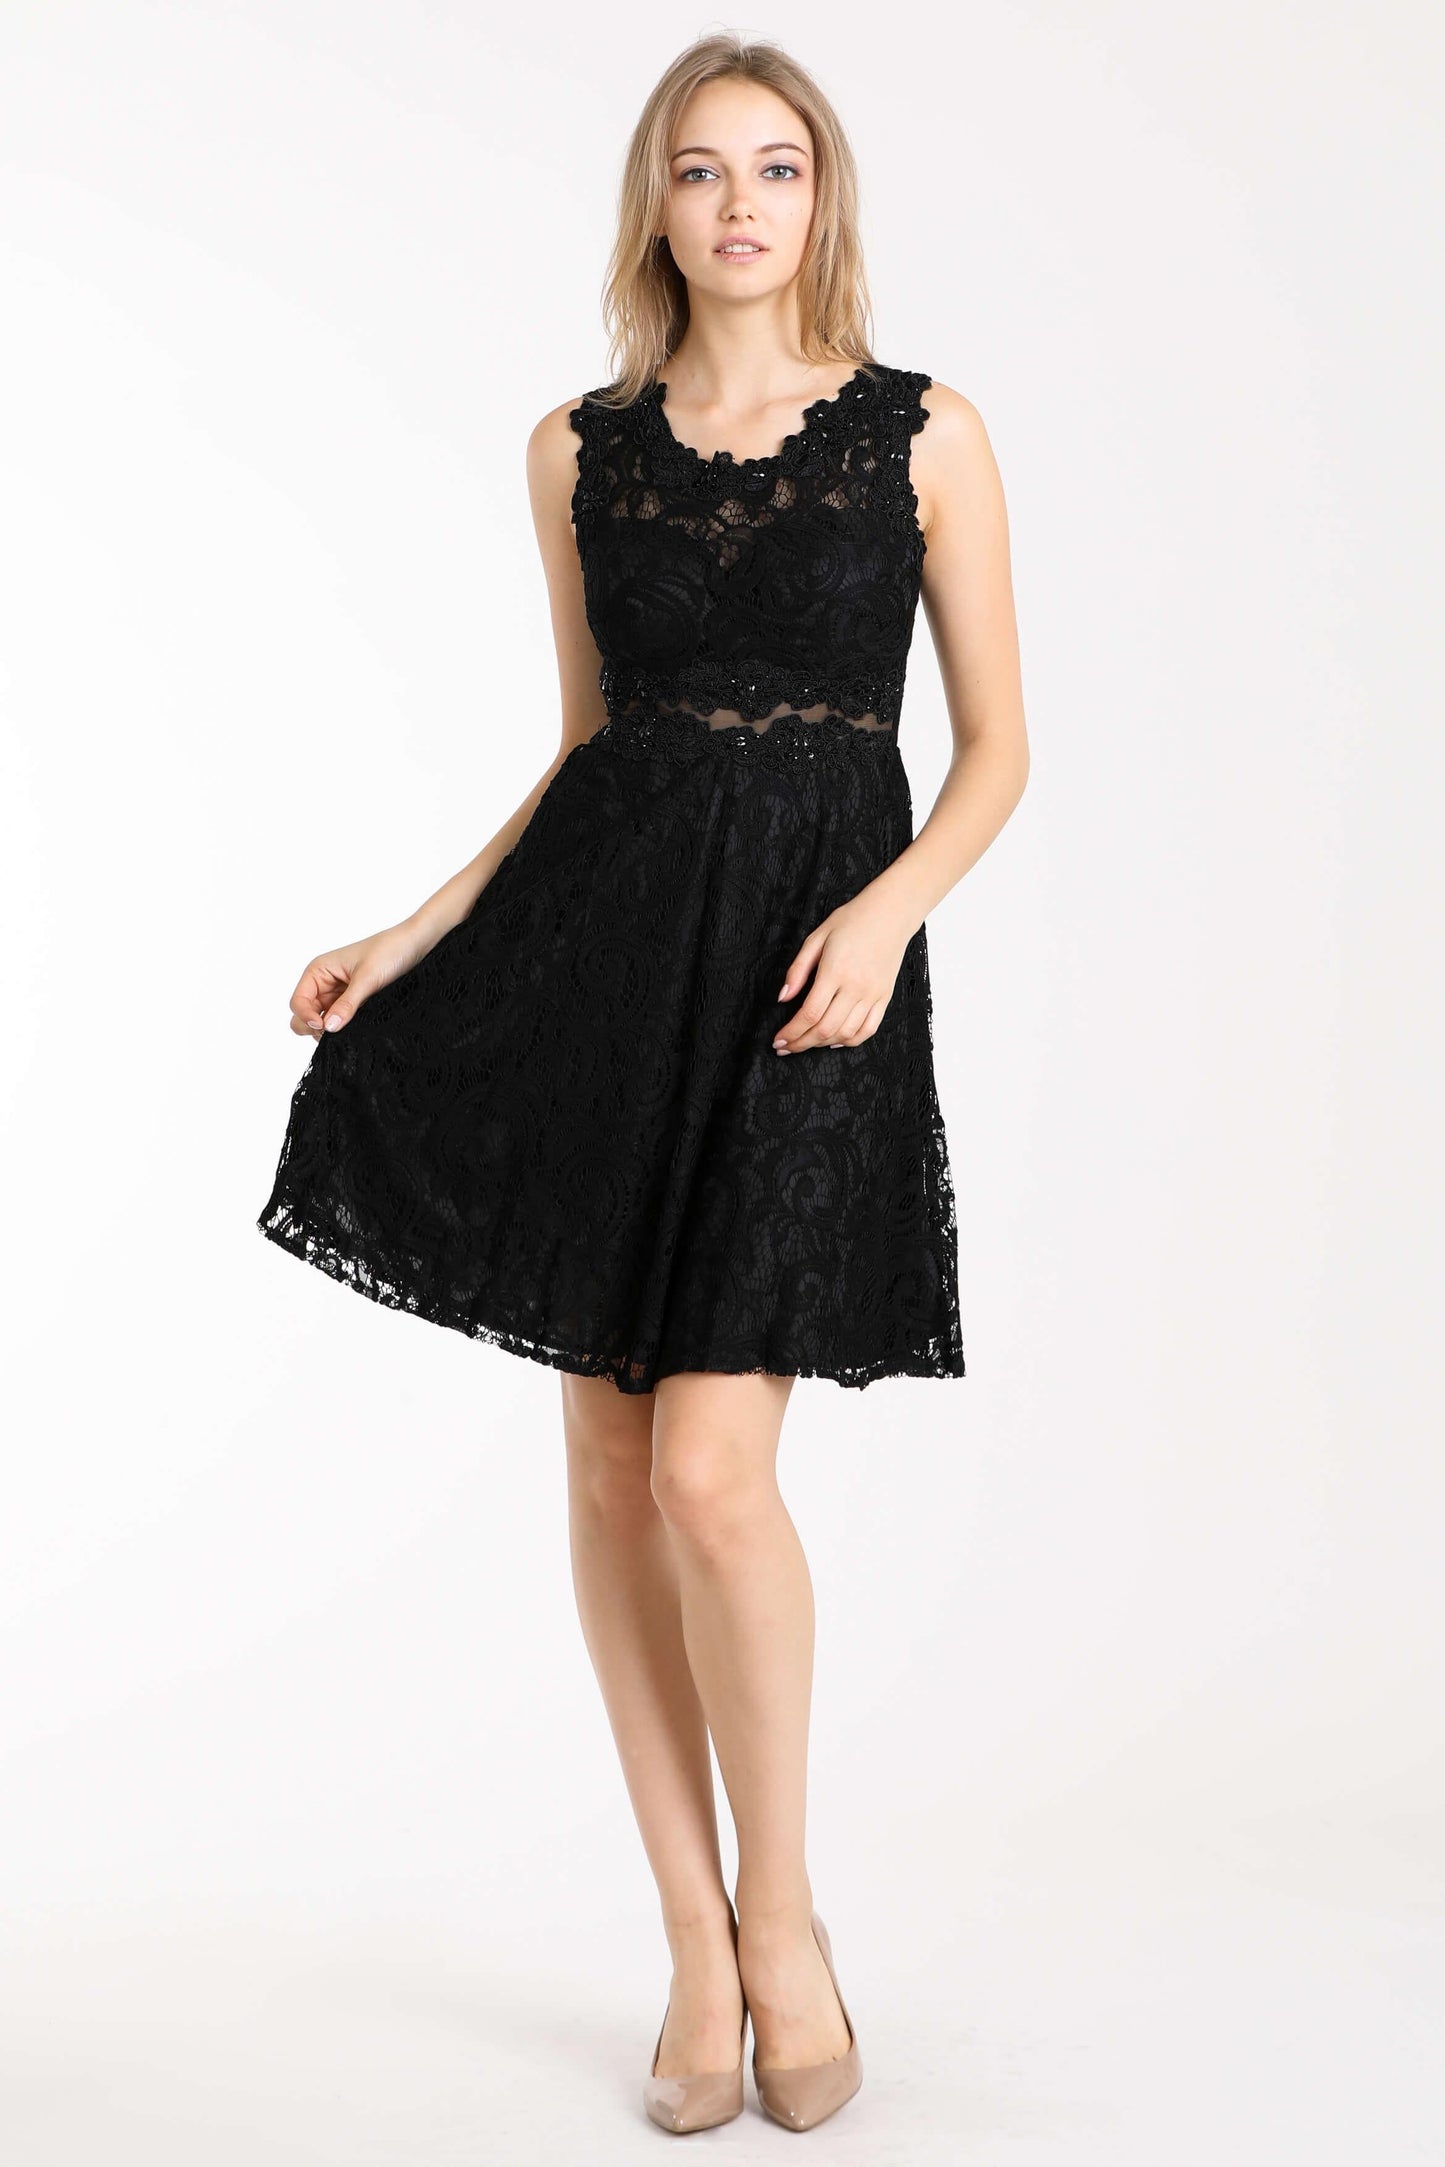 Short Black Lace Homecoming Prom Dress - The Dress Outlet Cinderella Divine